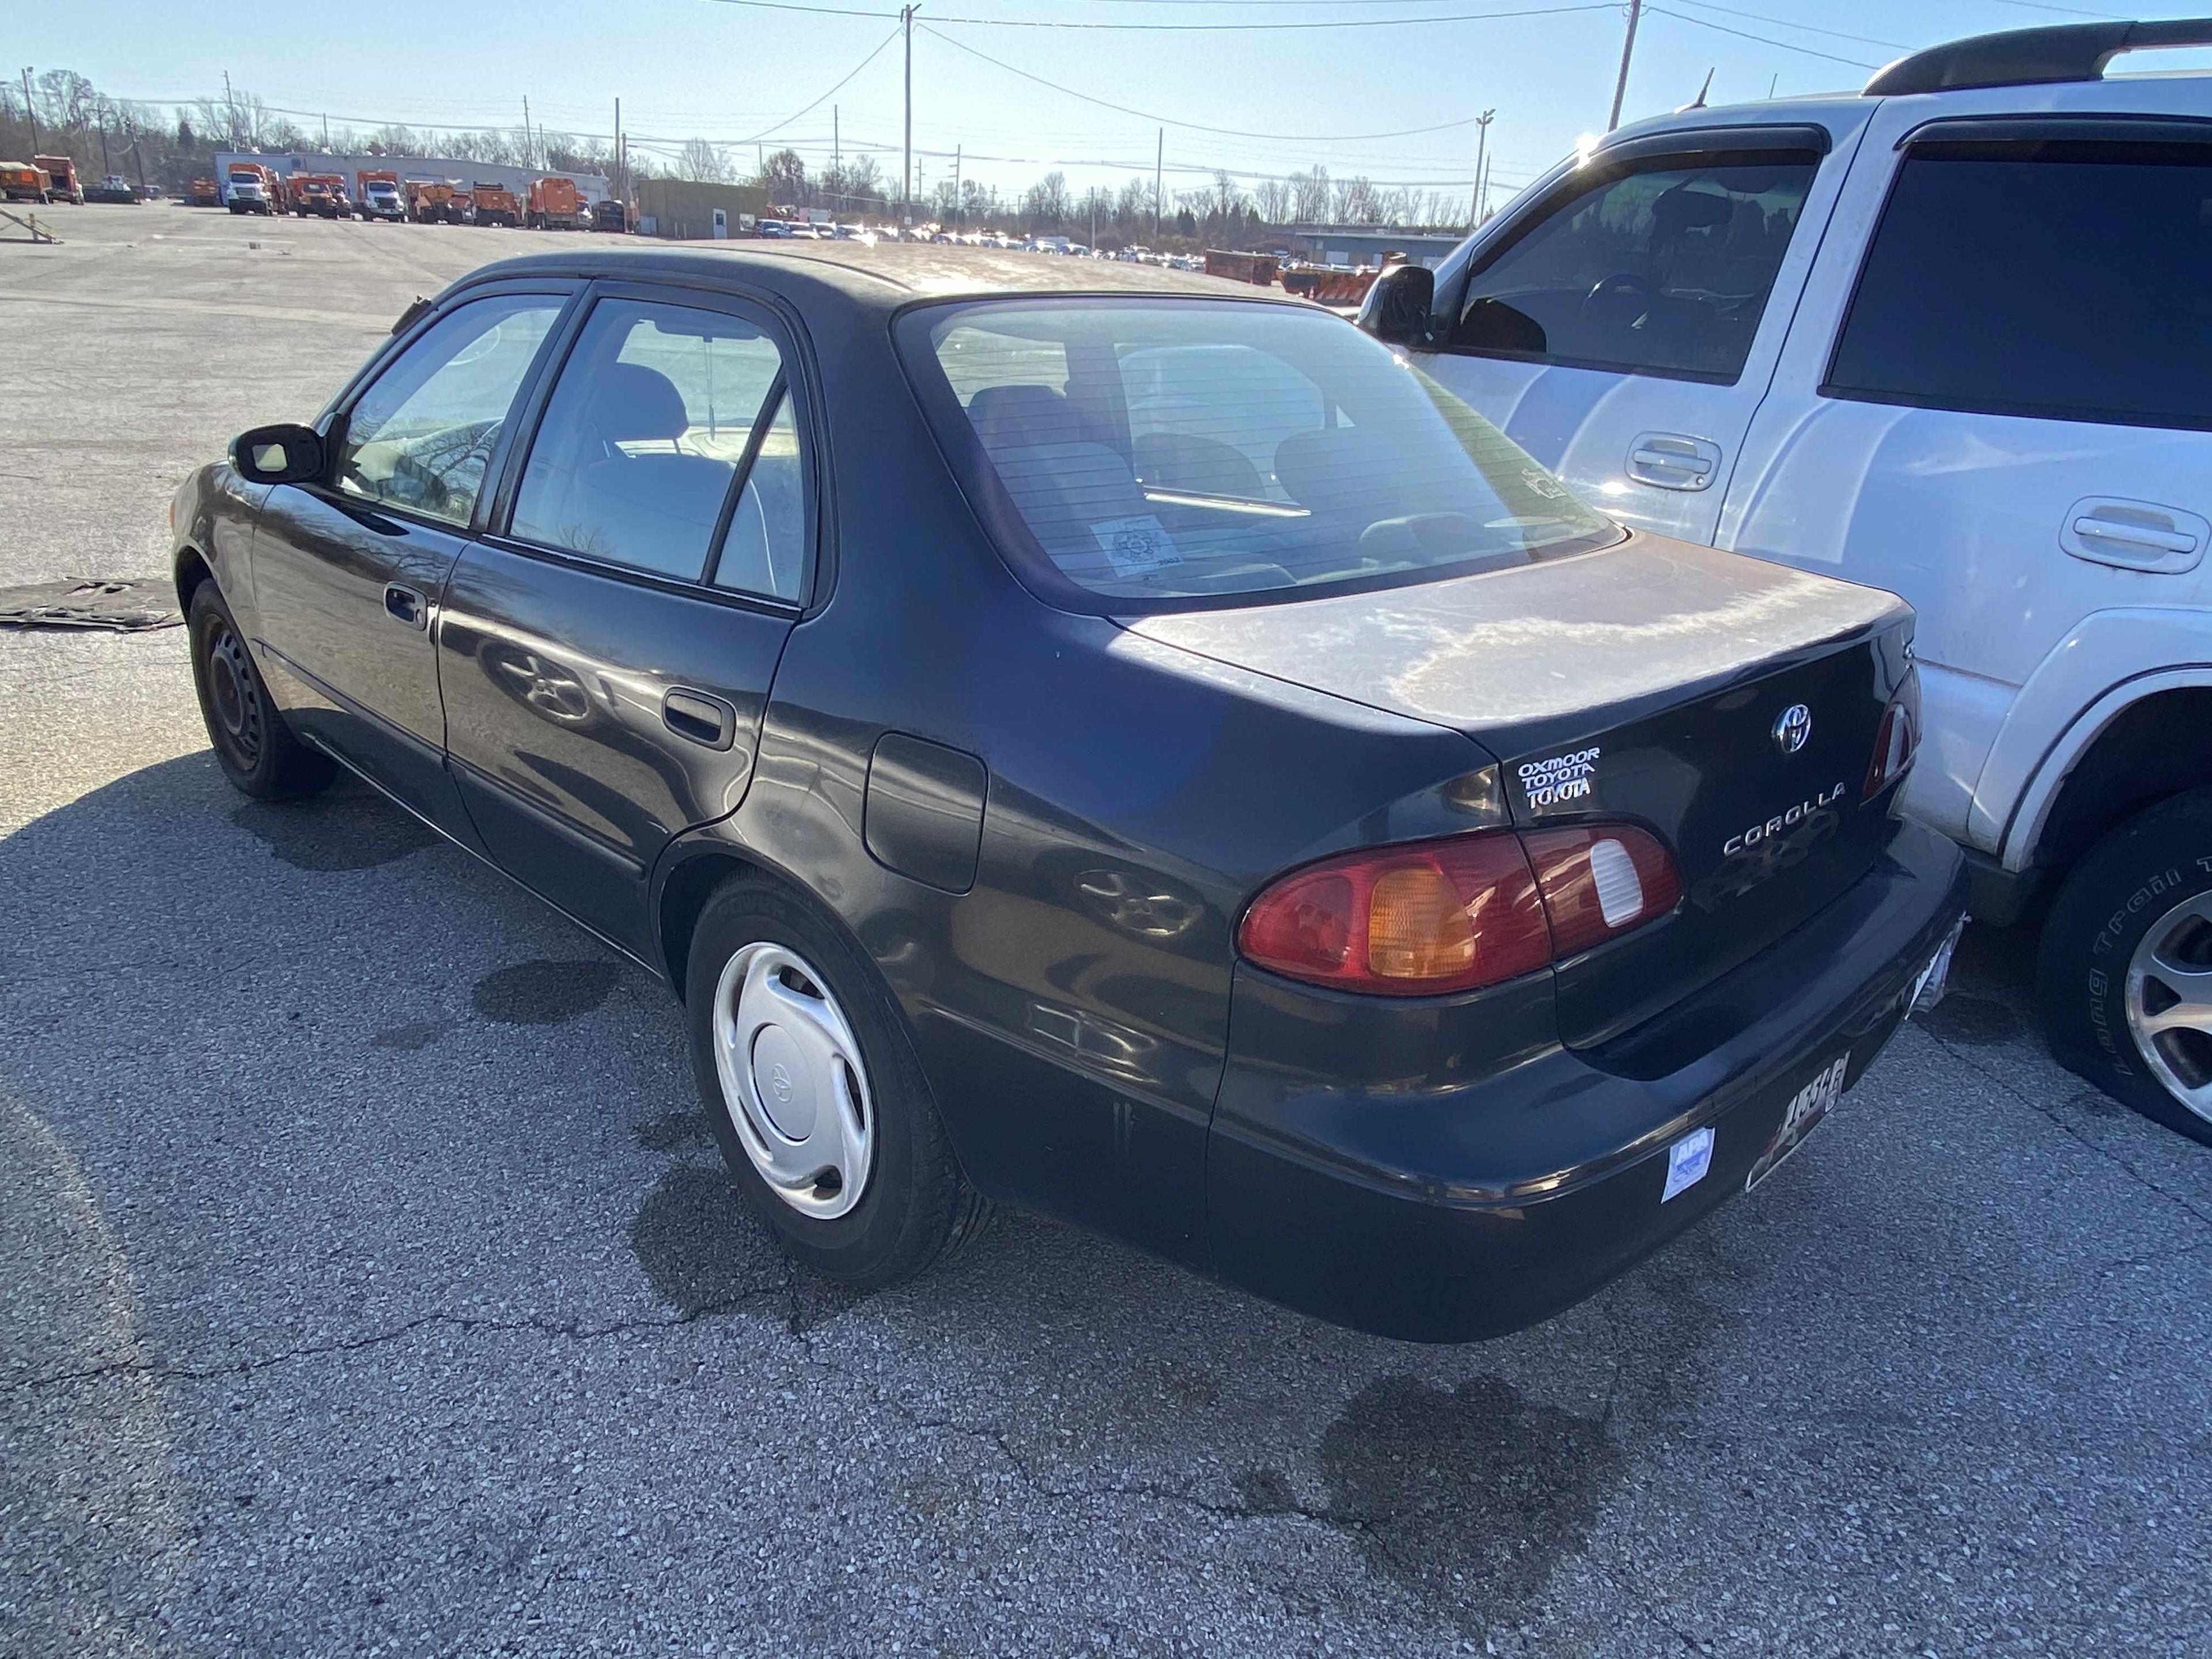 1999 Toyota Corolla with Bill of Sale Tow# 94709 Item 18